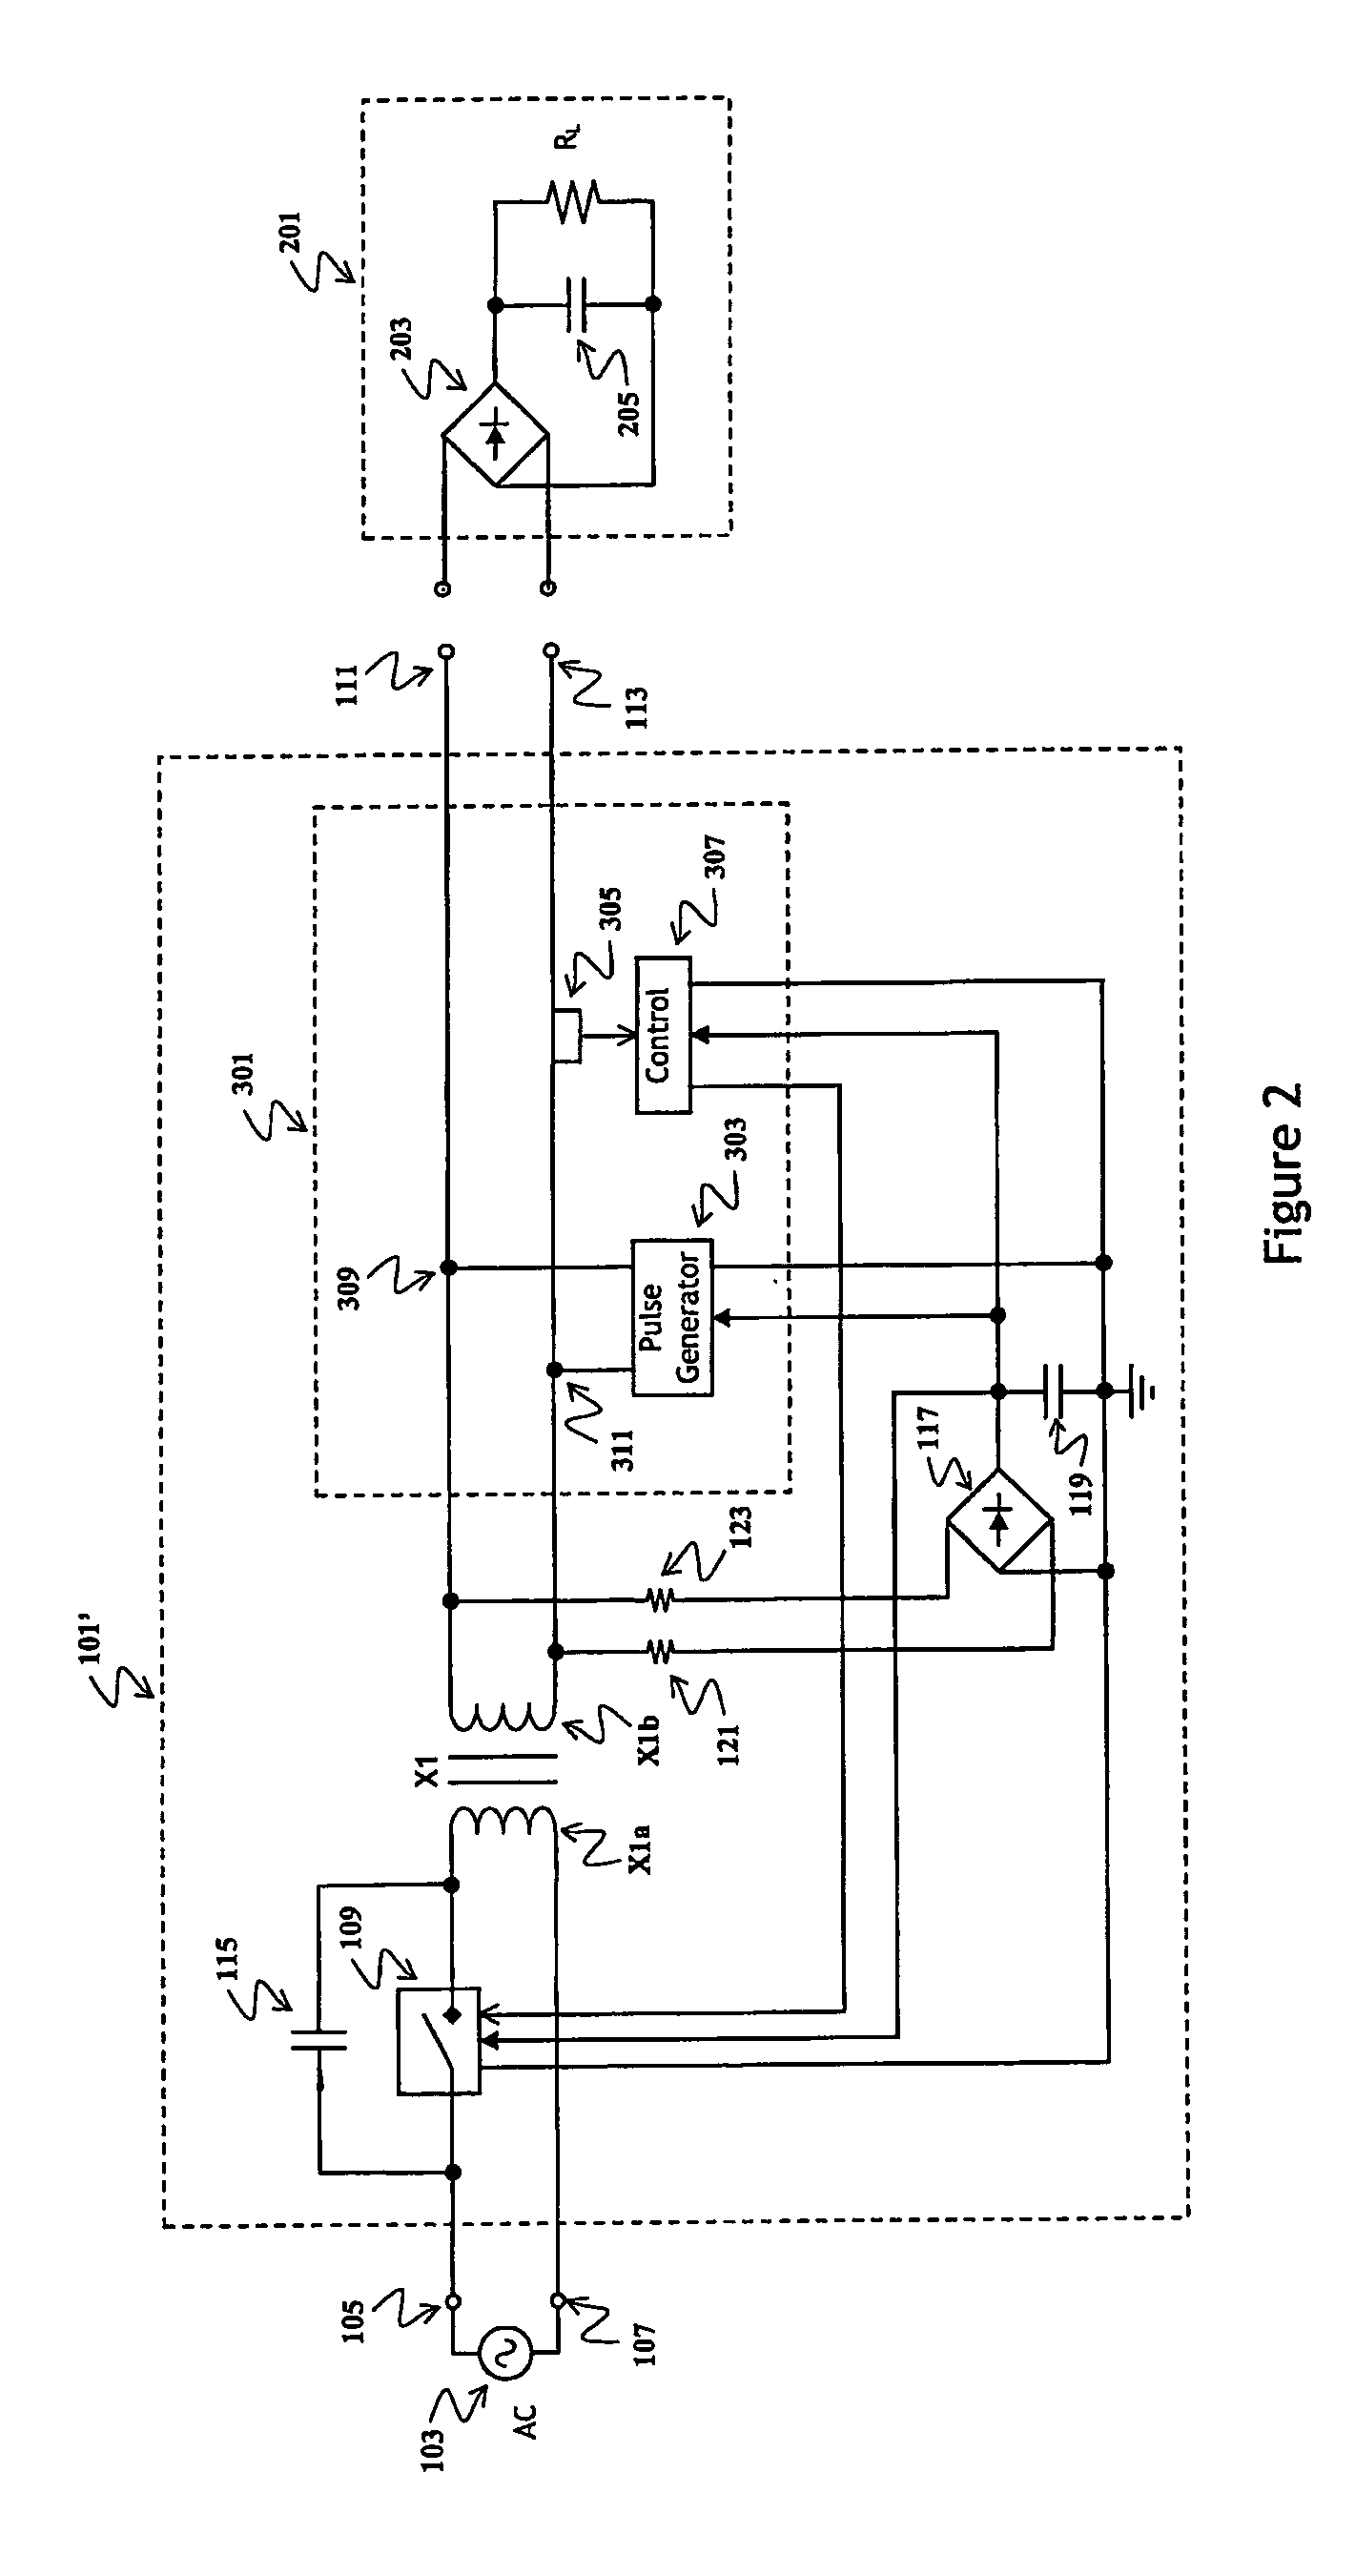 Load detector for an AC-AC power supply